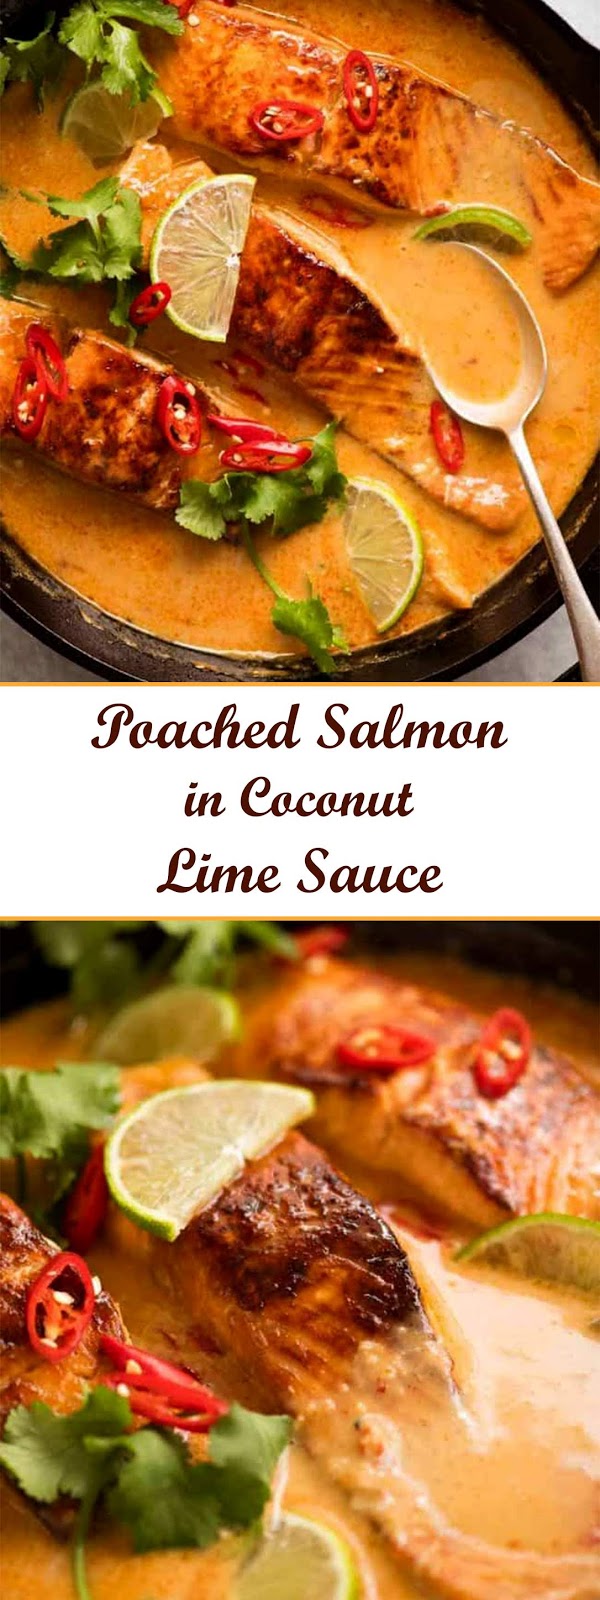 Poached Salmon in Coconut Lime Sauce | BANK HEALTHY